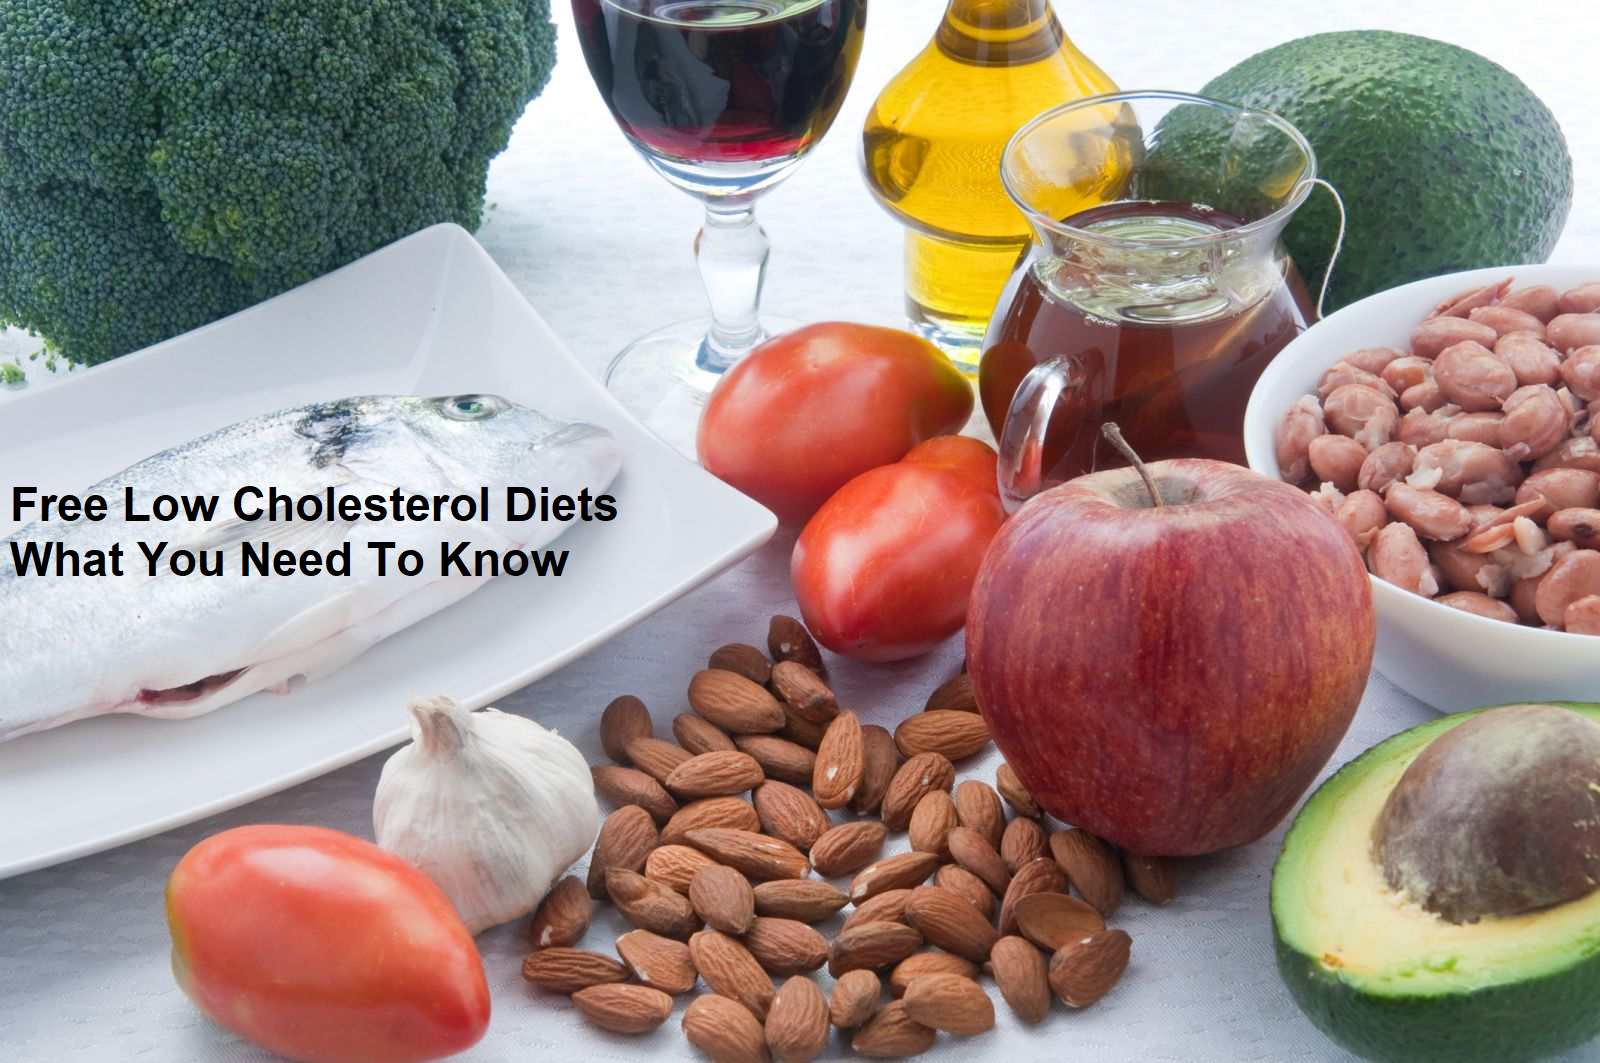 Free Low Cholesterol Diets - What You Need To Know